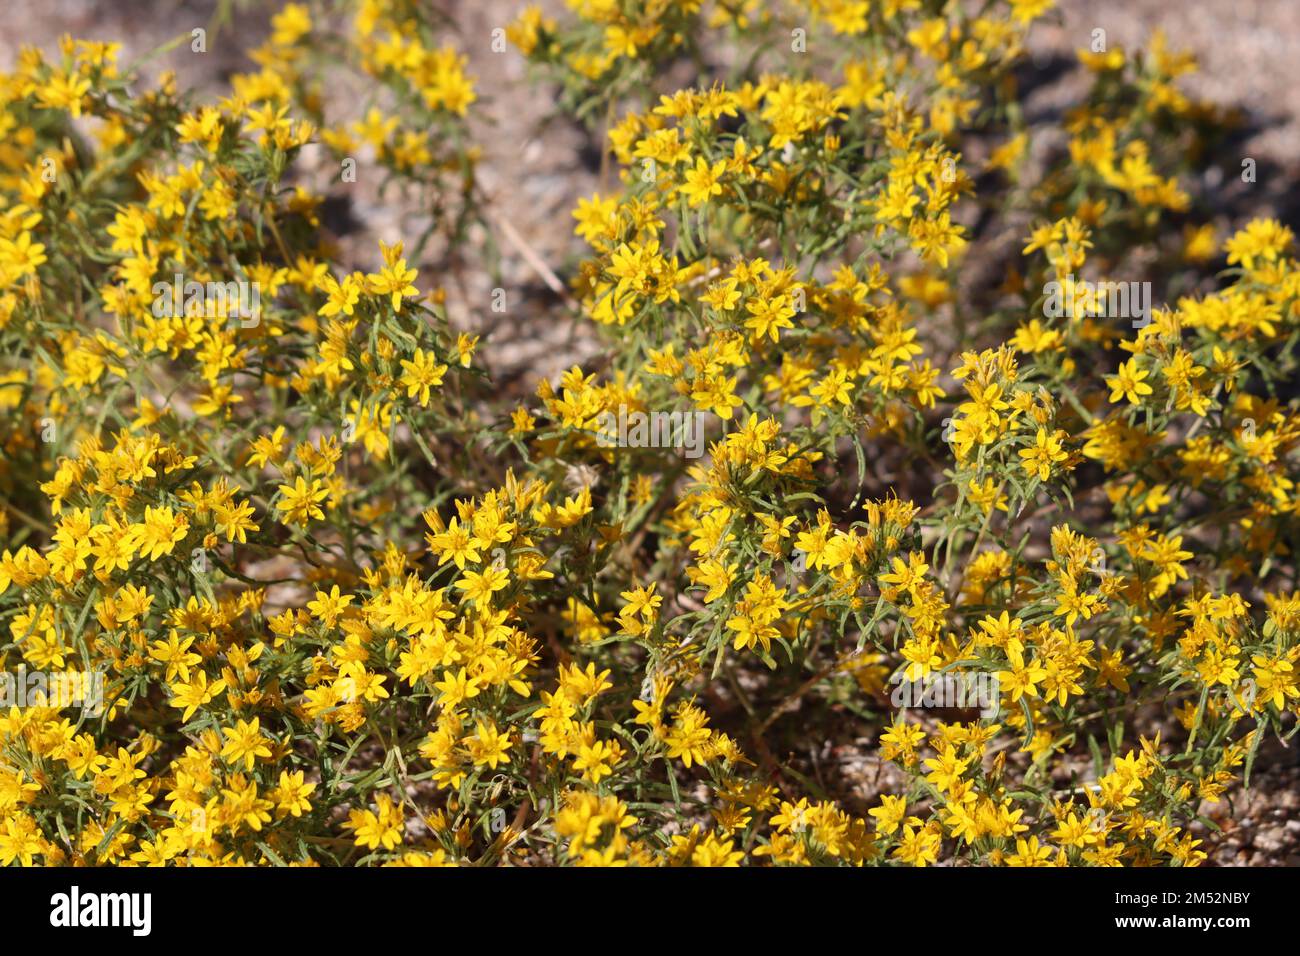 Yellow flowering racemose radiate head inflorescences of Pectis Papposa Variety Papposa, Asteraceae, native herb in the Borrego Valley Desert, Autumn. Stock Photo